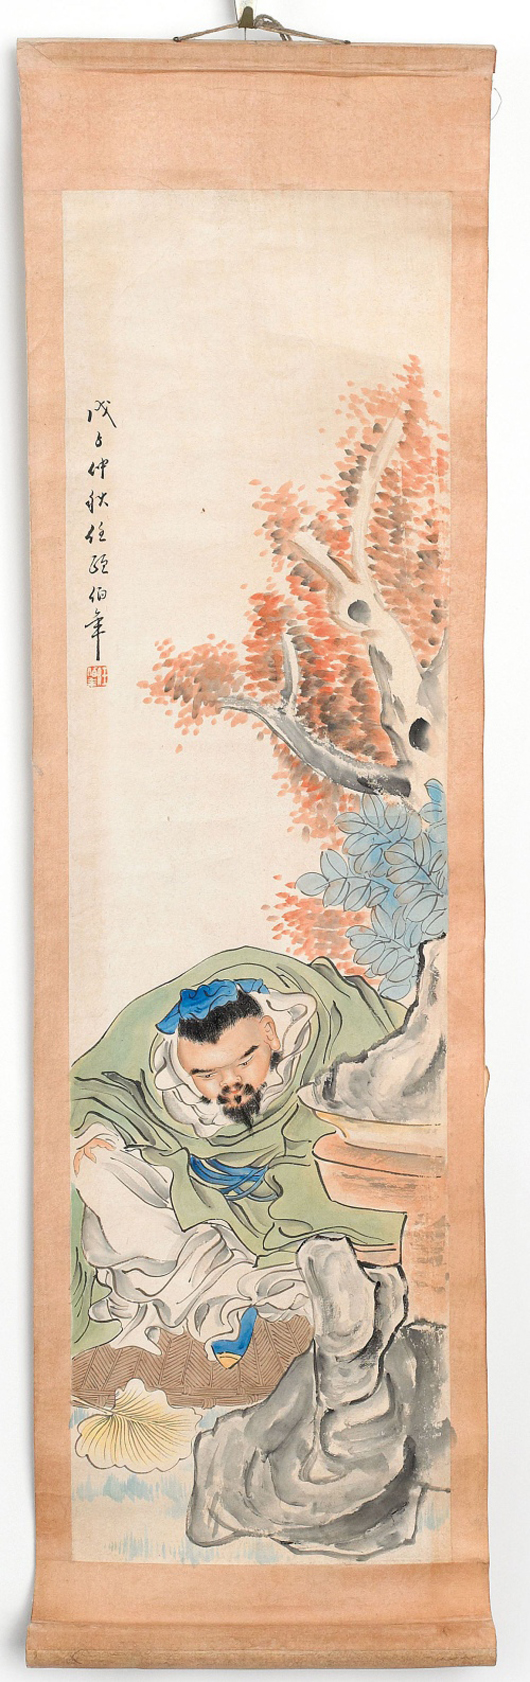 Six Chinese painted scrolls: $5,214. Image courtesy of Pook & Pook Inc.